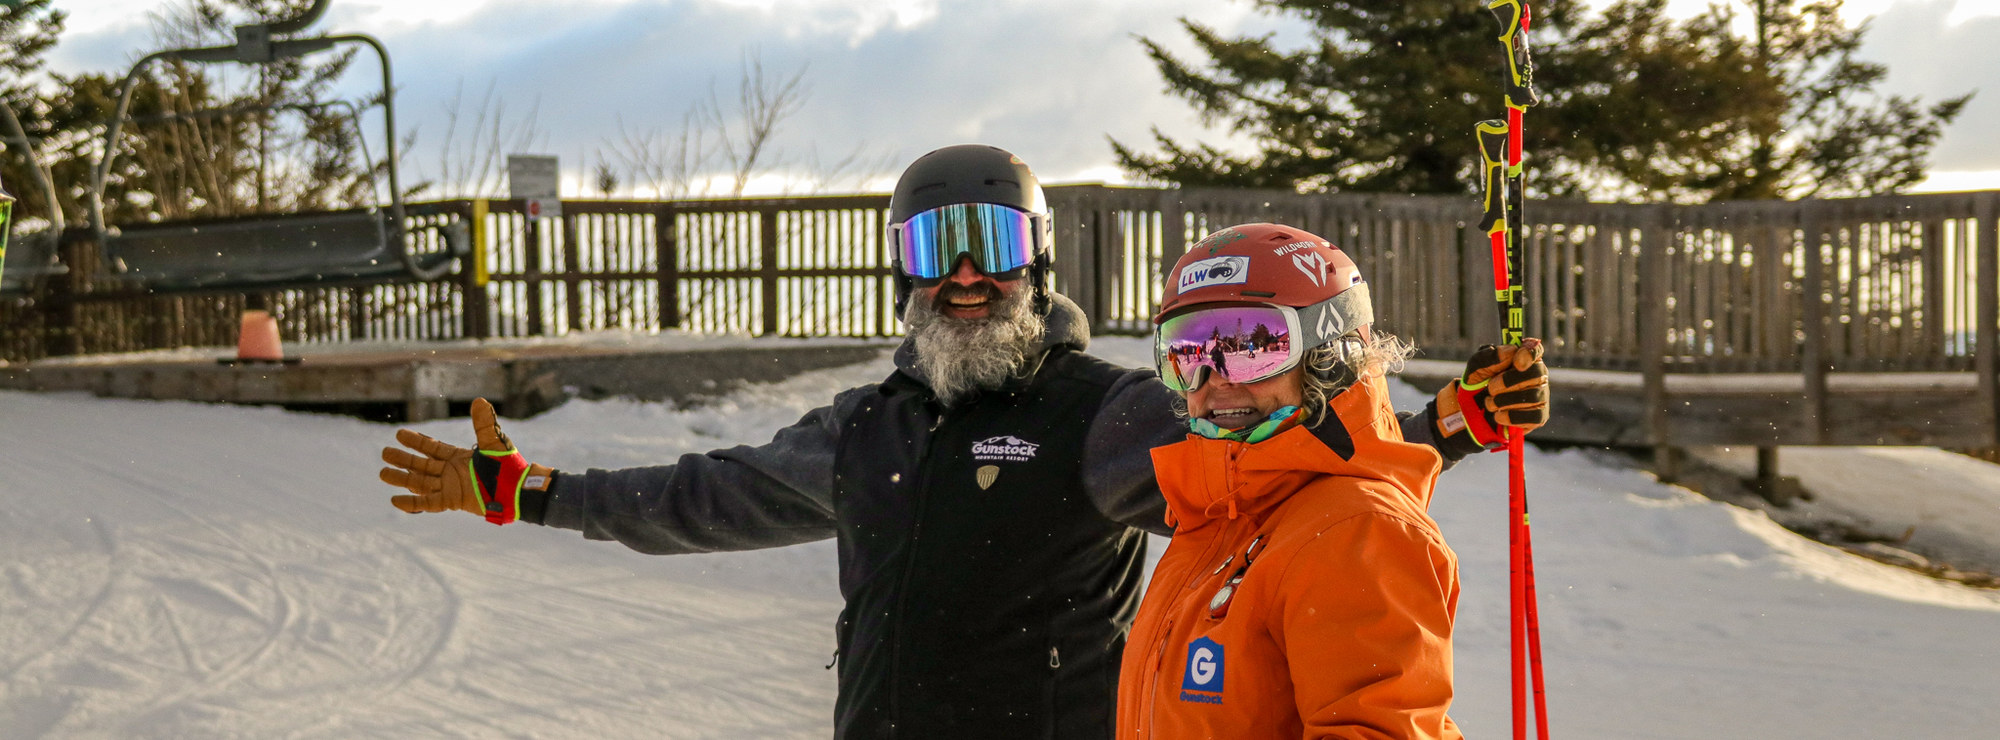 Man and woman pose in front of panorama lift